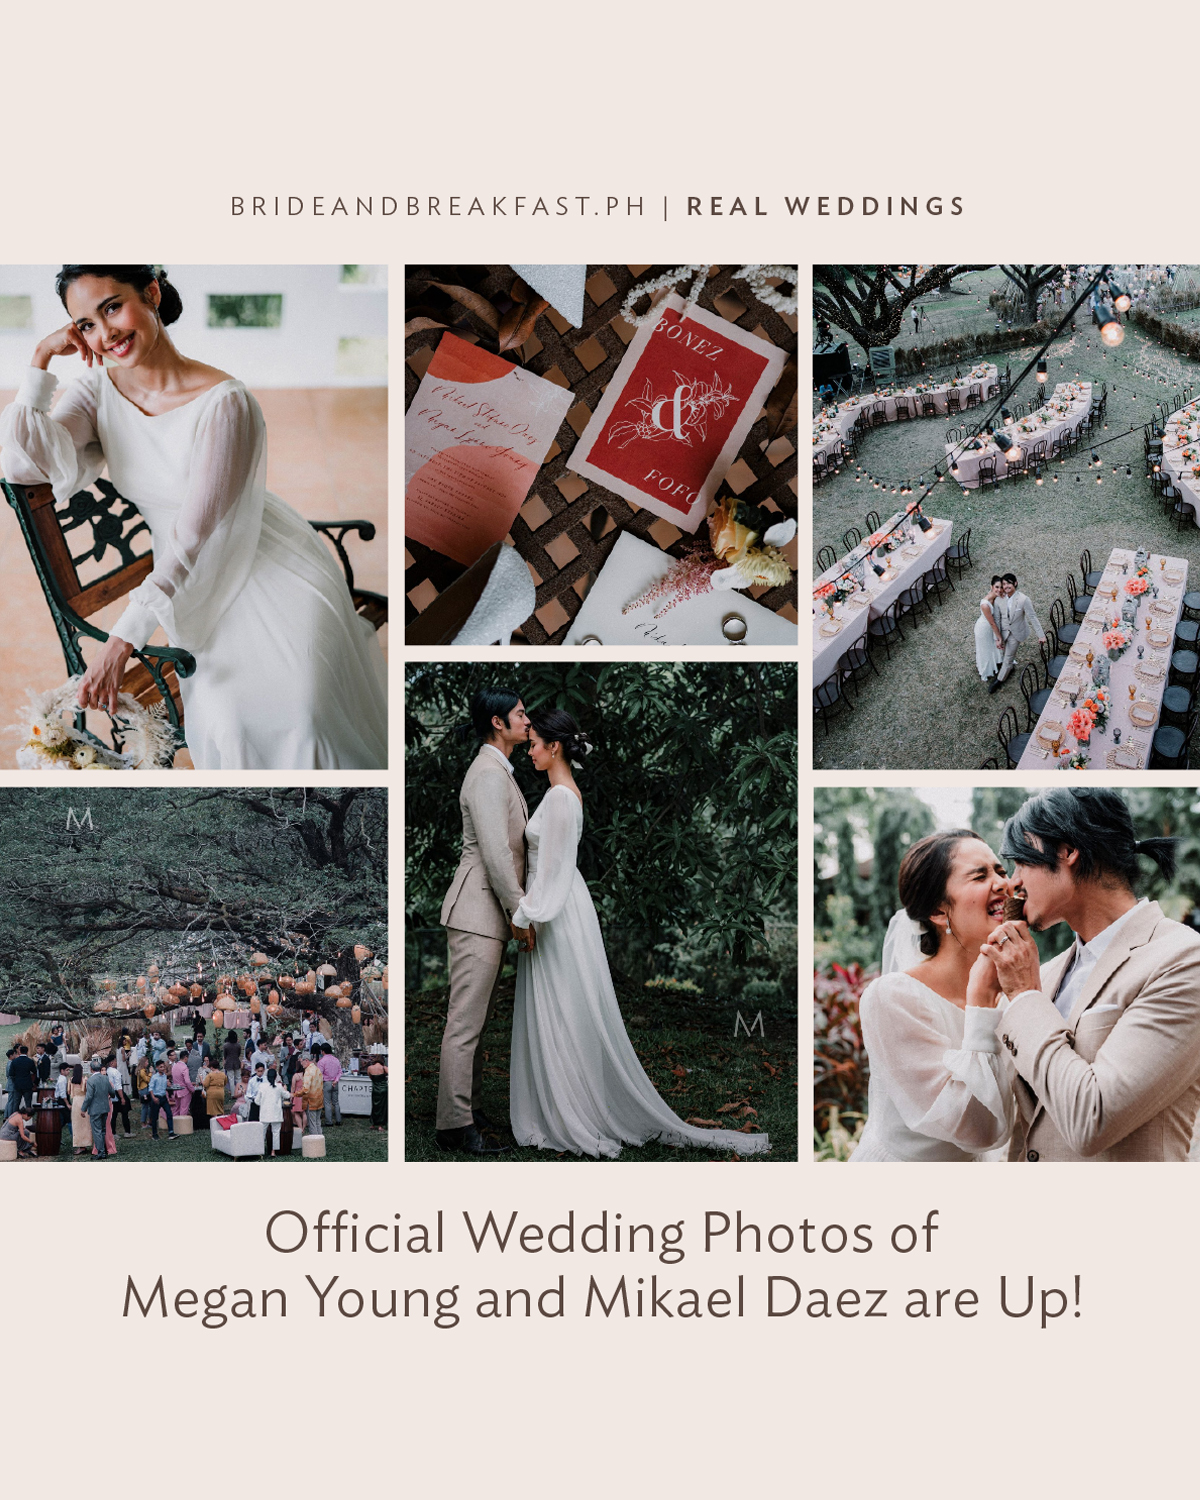 Official Wedding Photos of Megan Young and Mikael Daez are Up!